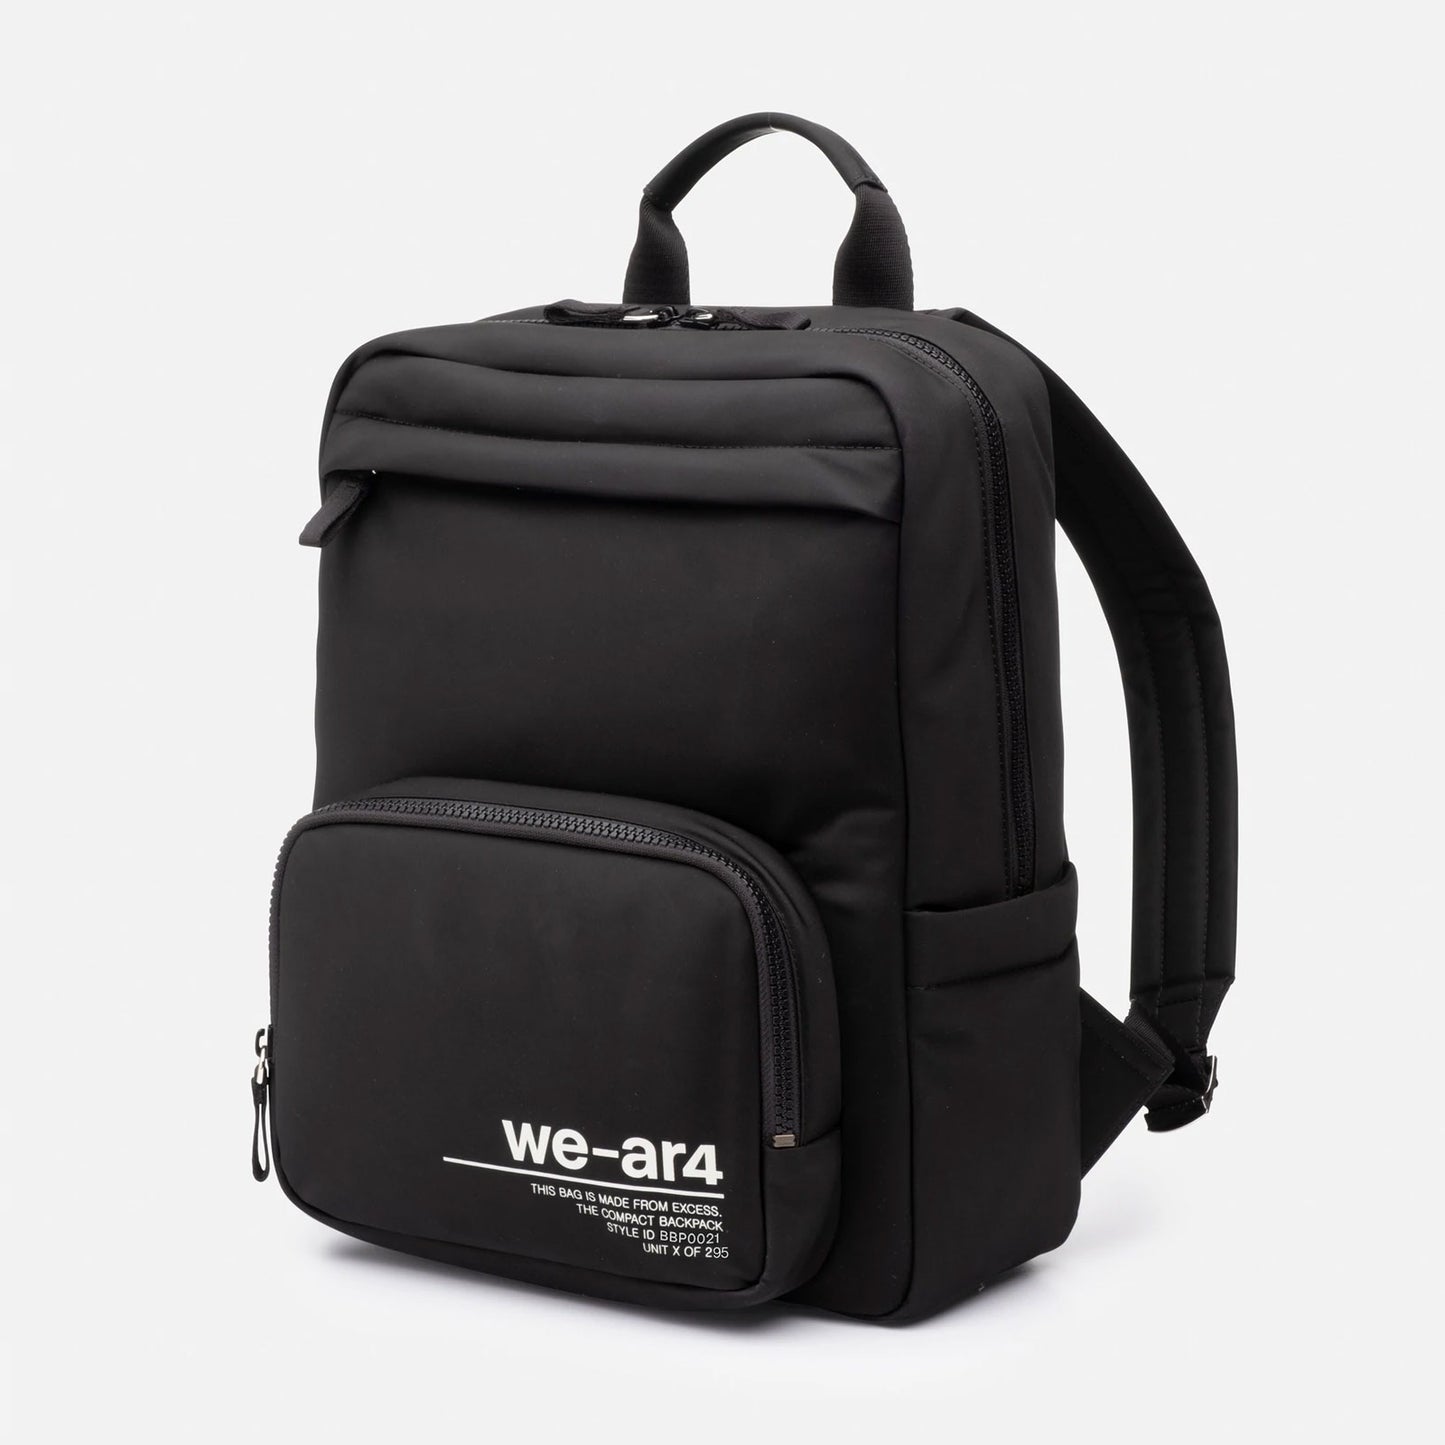 The Compact Backpack in Black